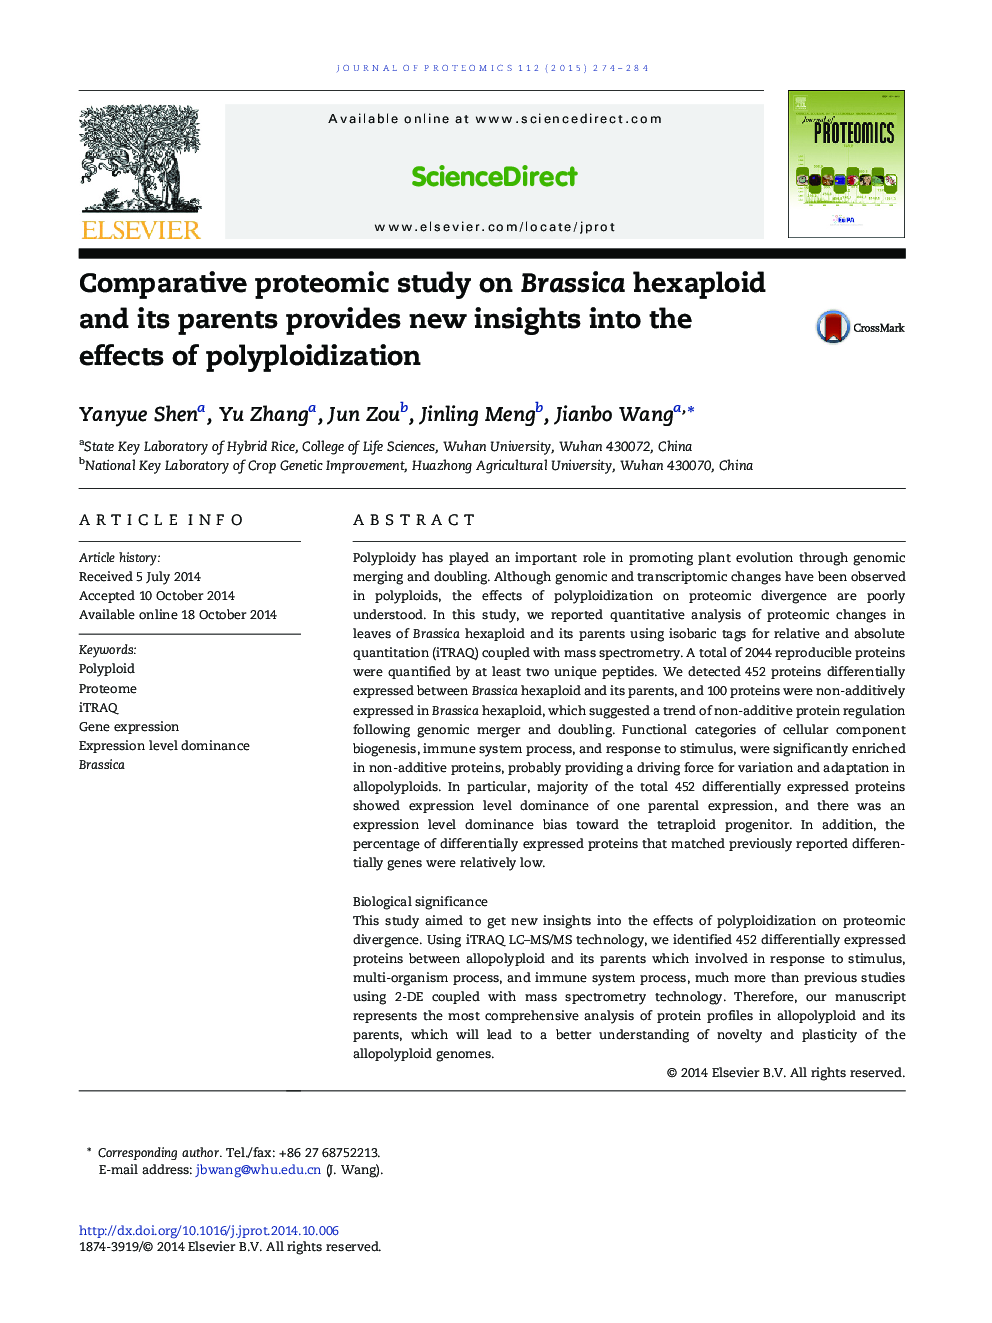 Comparative proteomic study on Brassica hexaploid and its parents provides new insights into the effects of polyploidization